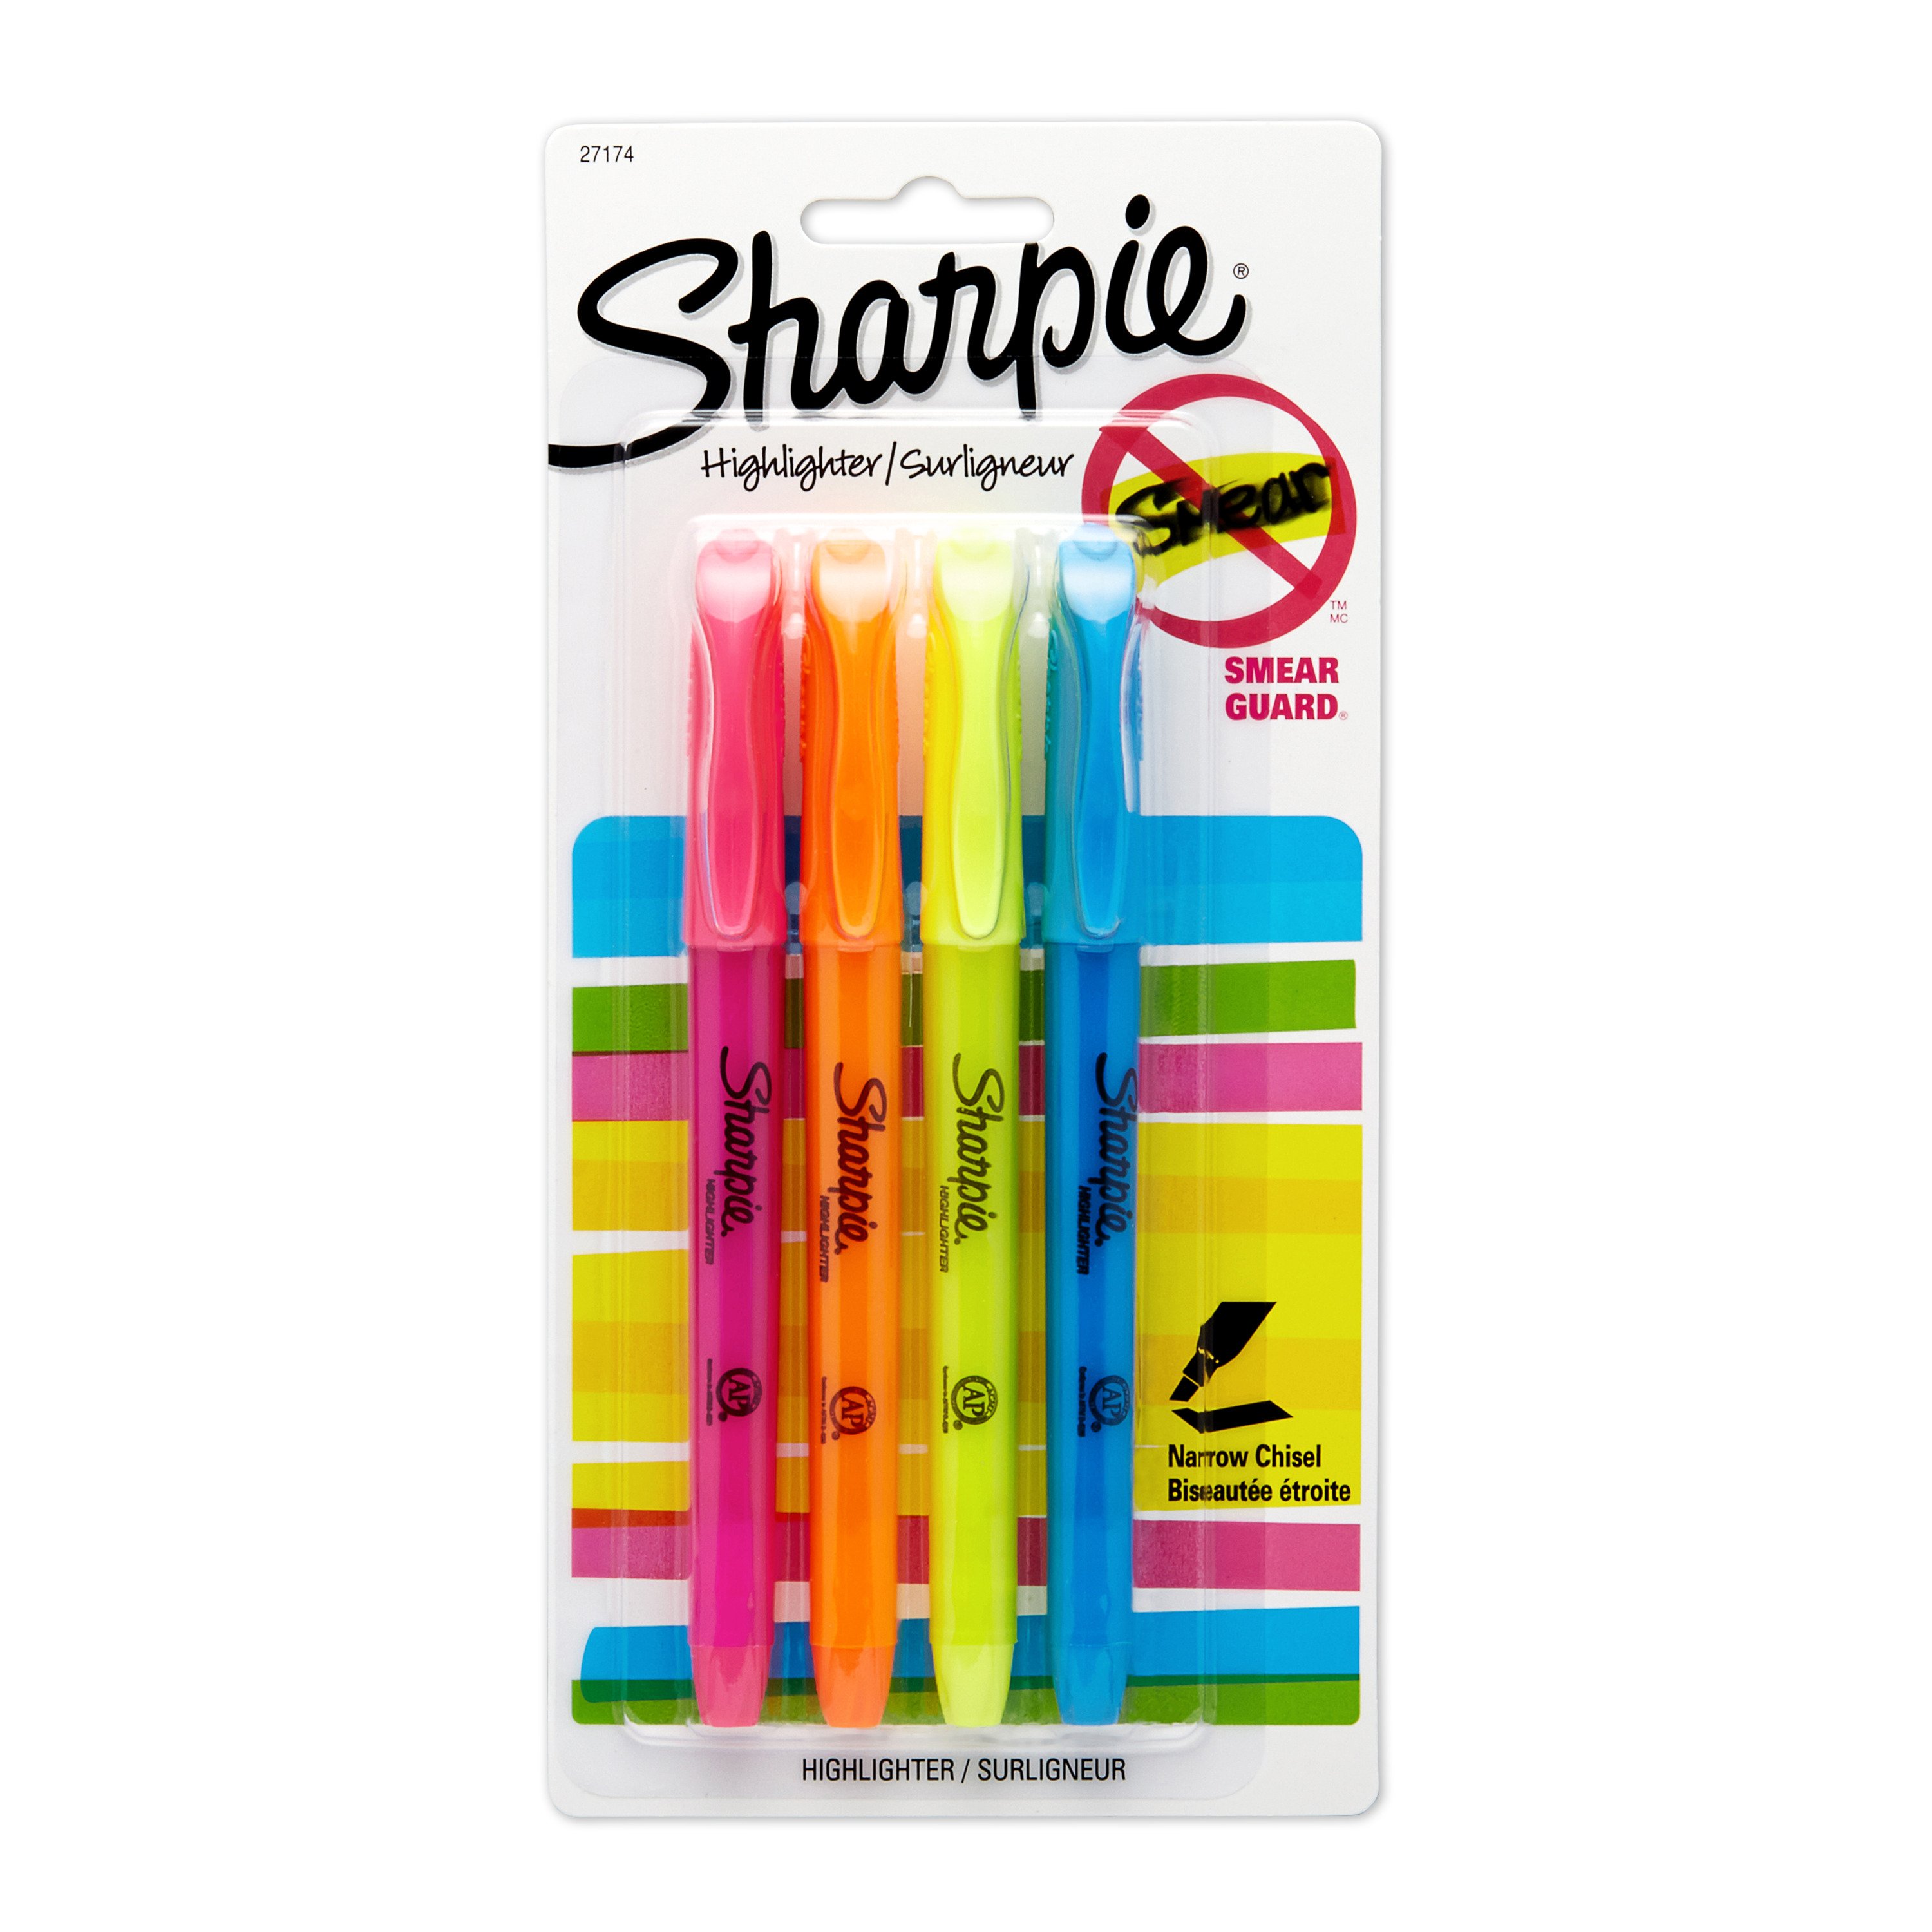 Hi-Liter Pen-Style Highlighters, Assorted Colors, Smear Safe, Nontoxic  7170923565